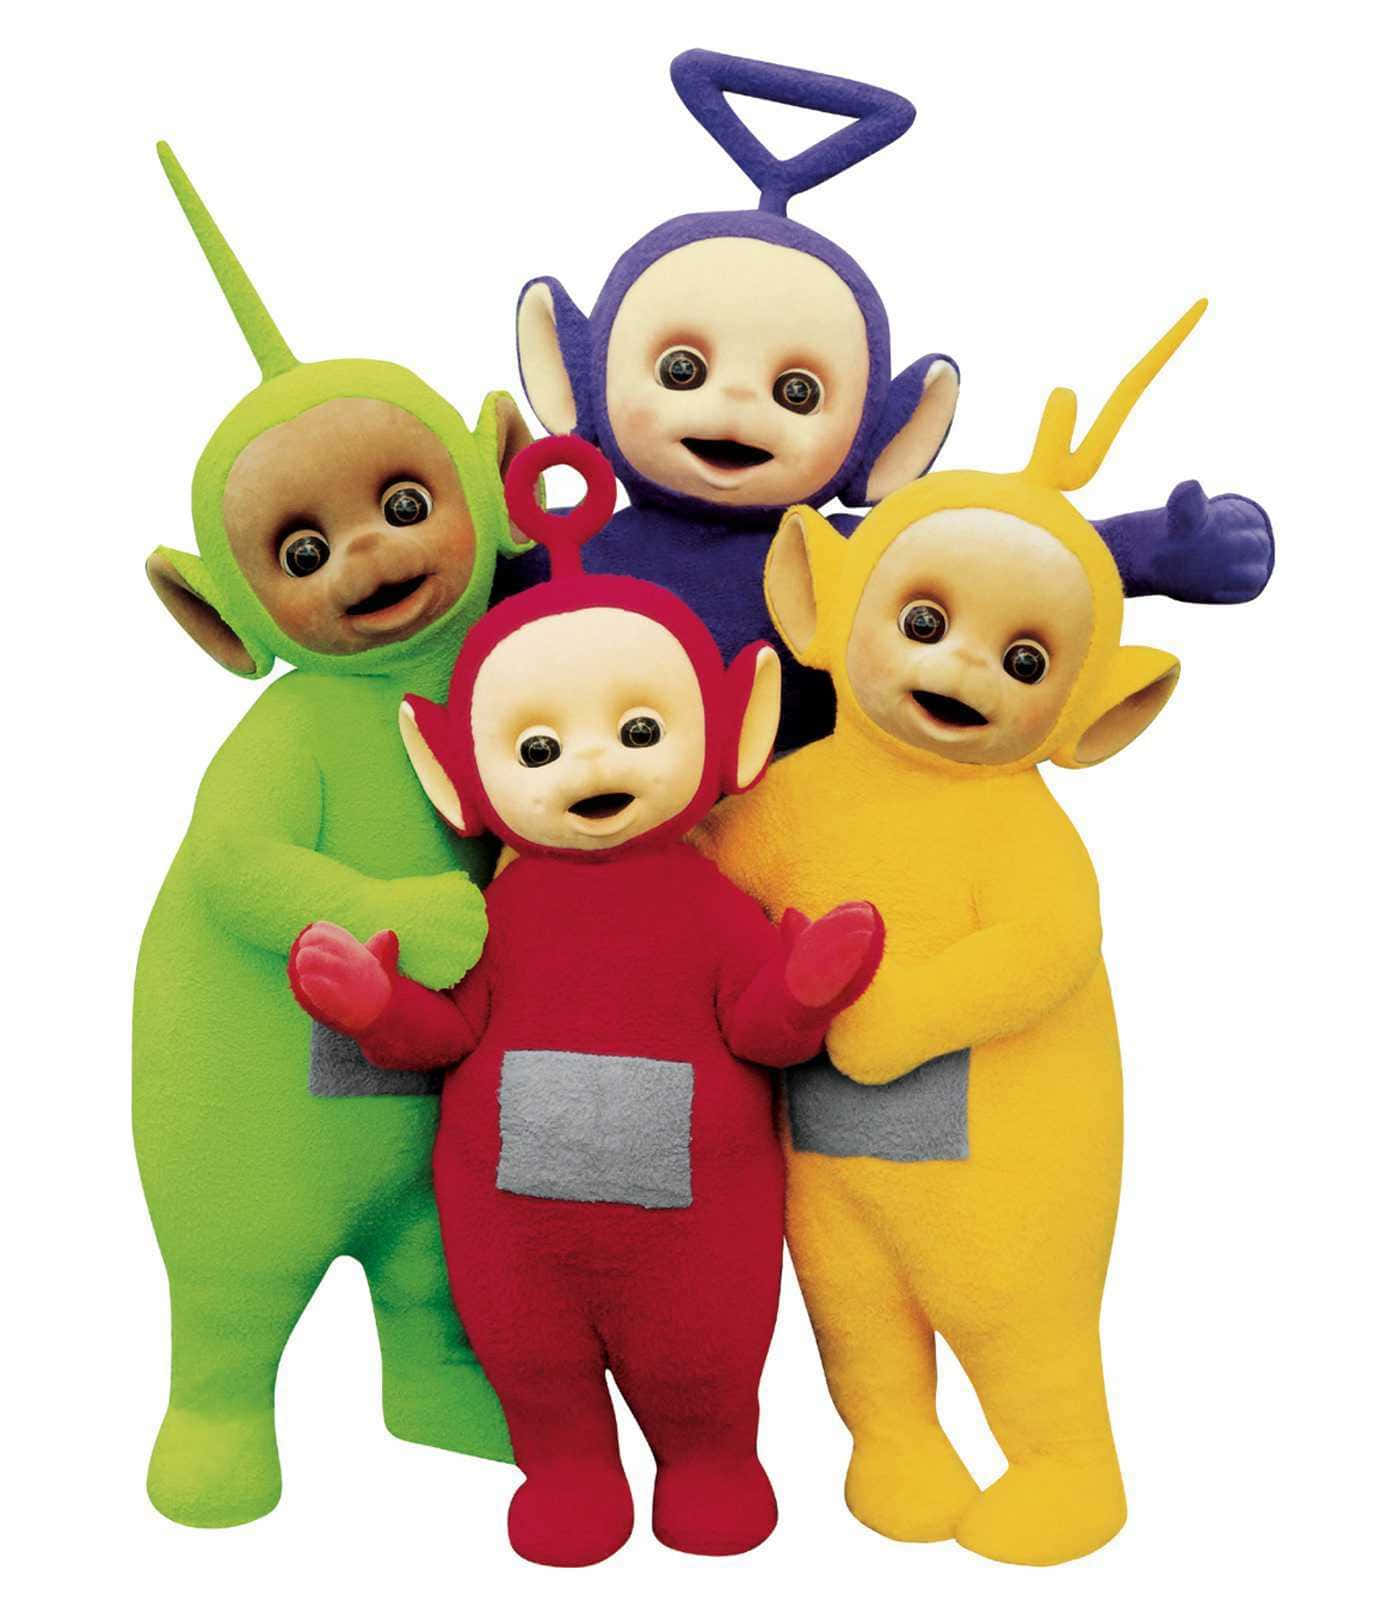 Teletubbies - A Group Of Colorful Characters